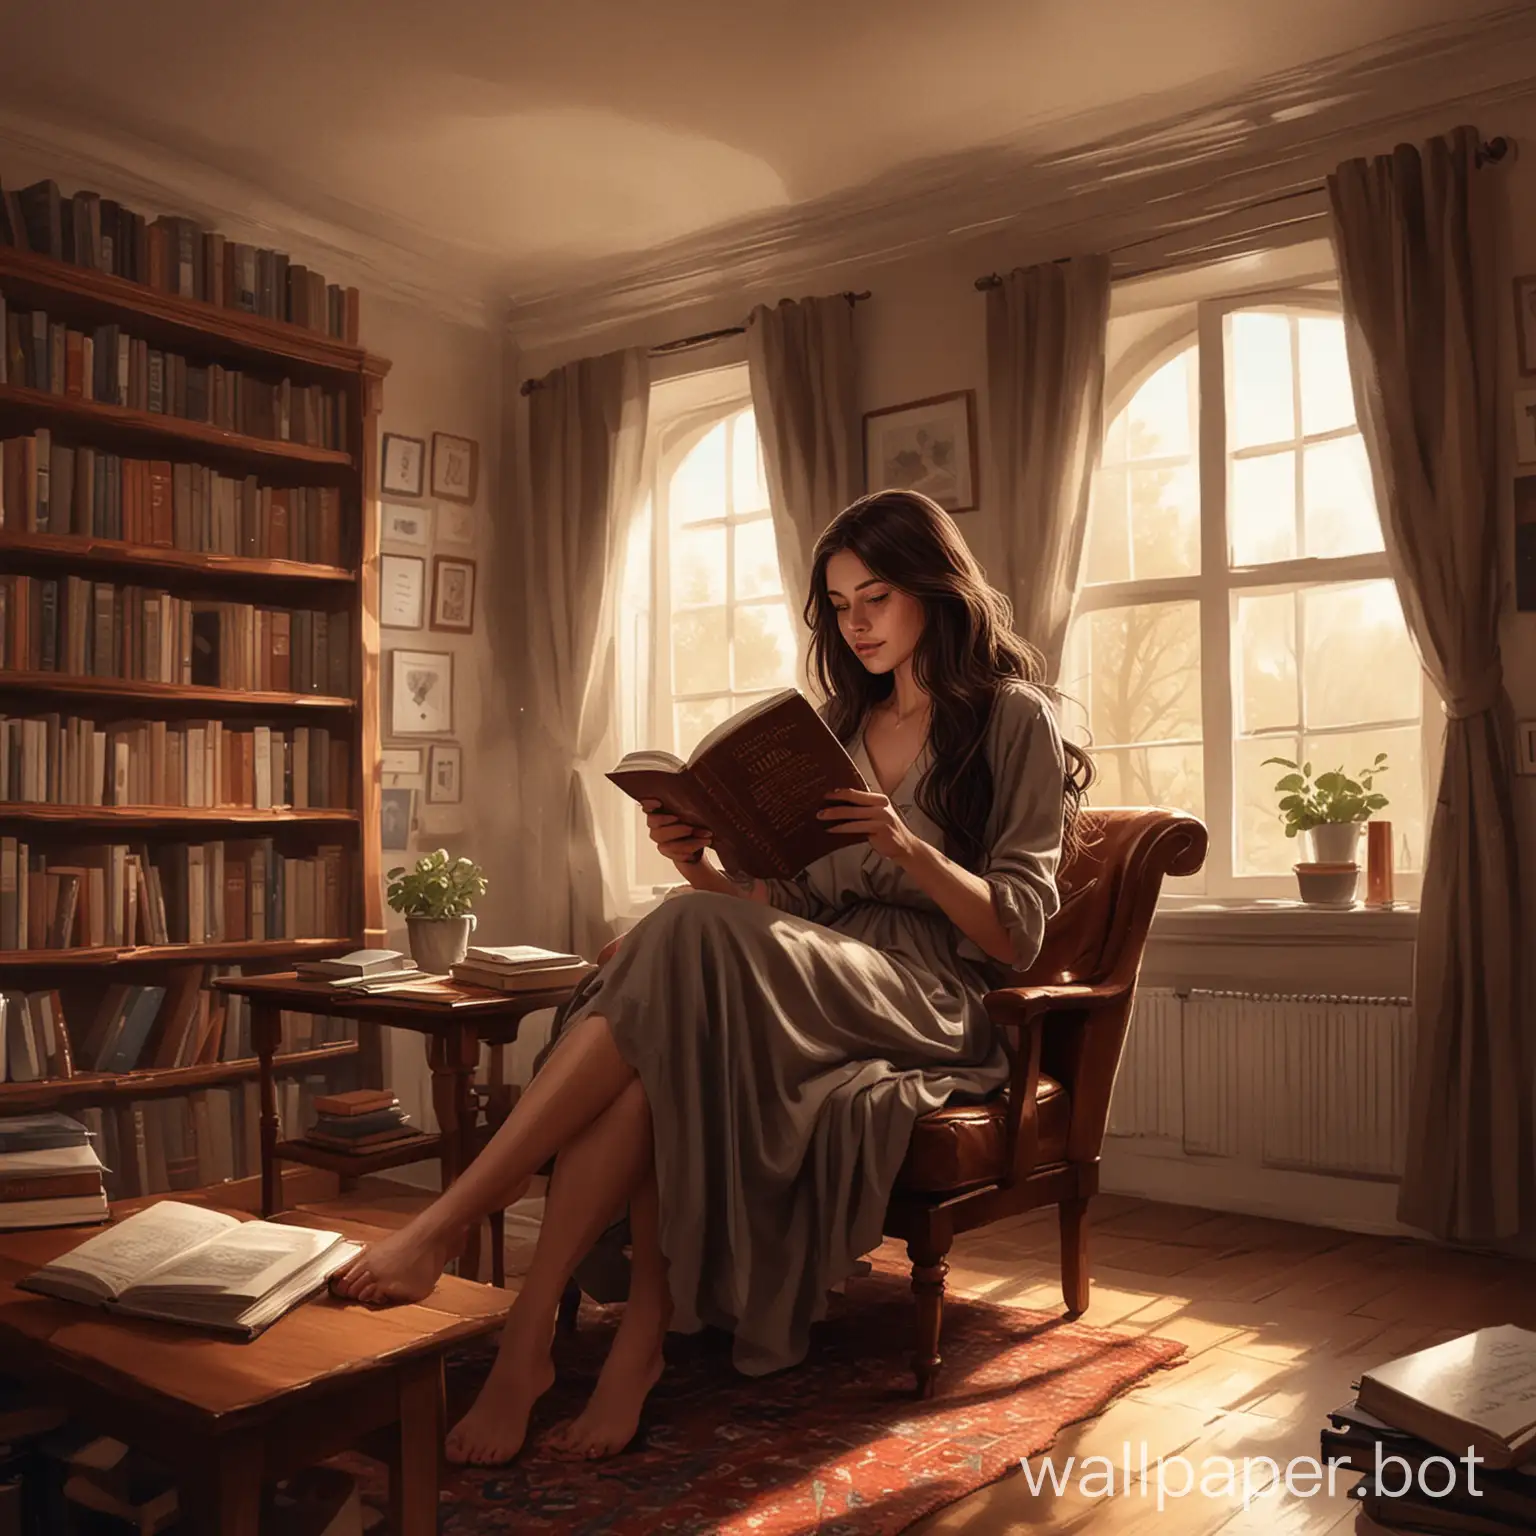 Woman-with-Dark-Brown-Long-Hair-Reading-Book-in-Reading-Room